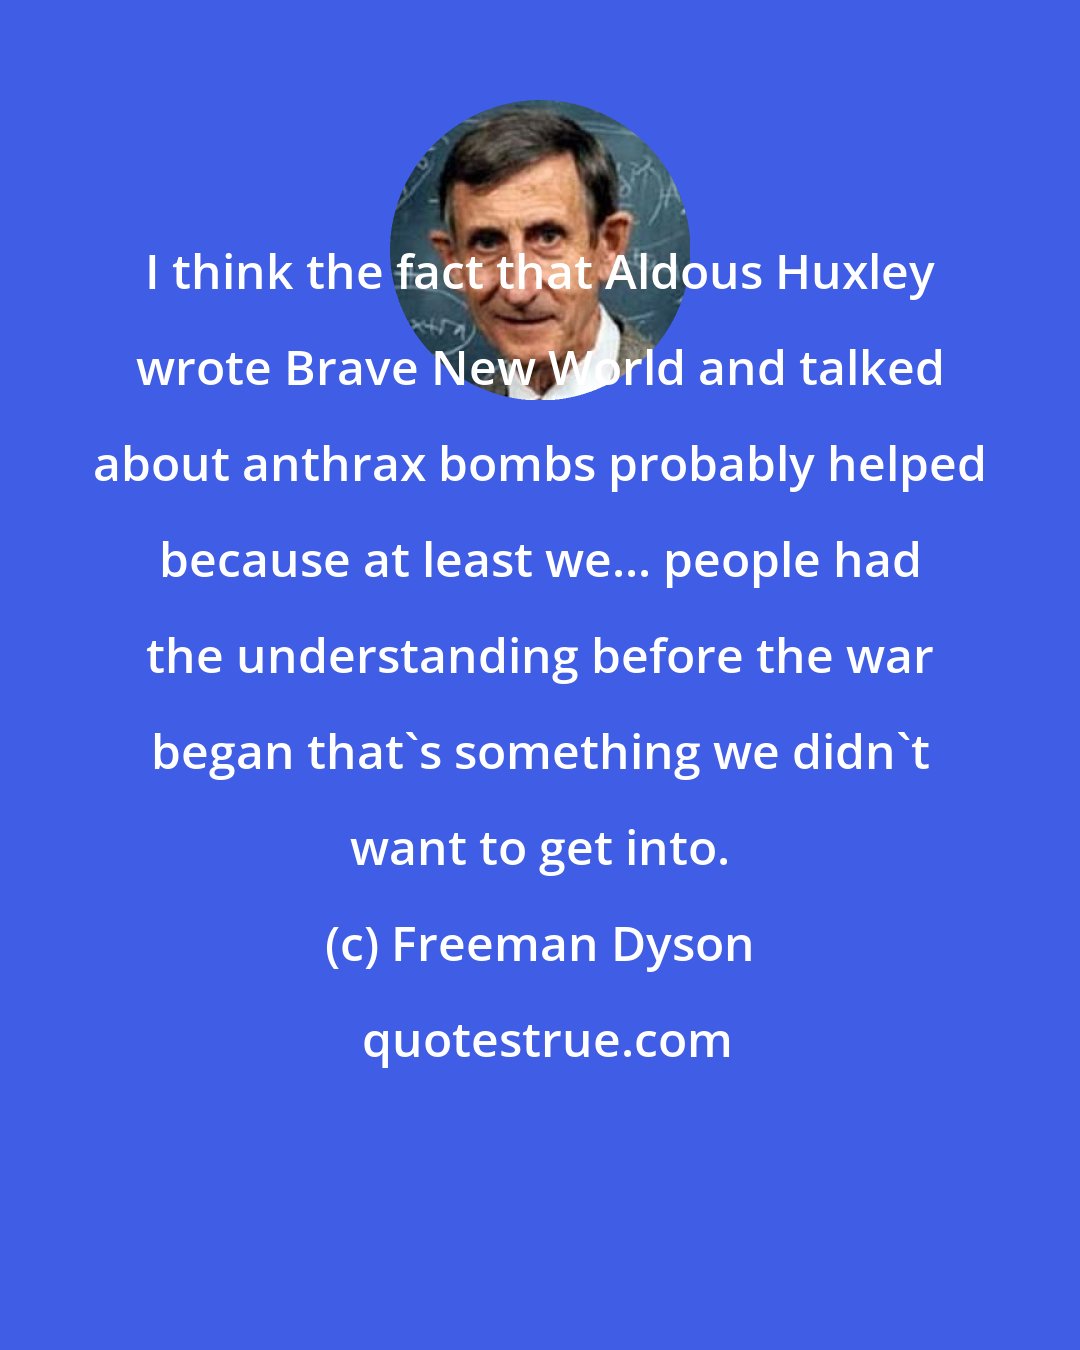 Freeman Dyson: I think the fact that Aldous Huxley wrote Brave New World and talked about anthrax bombs probably helped because at least we... people had the understanding before the war began that's something we didn't want to get into.